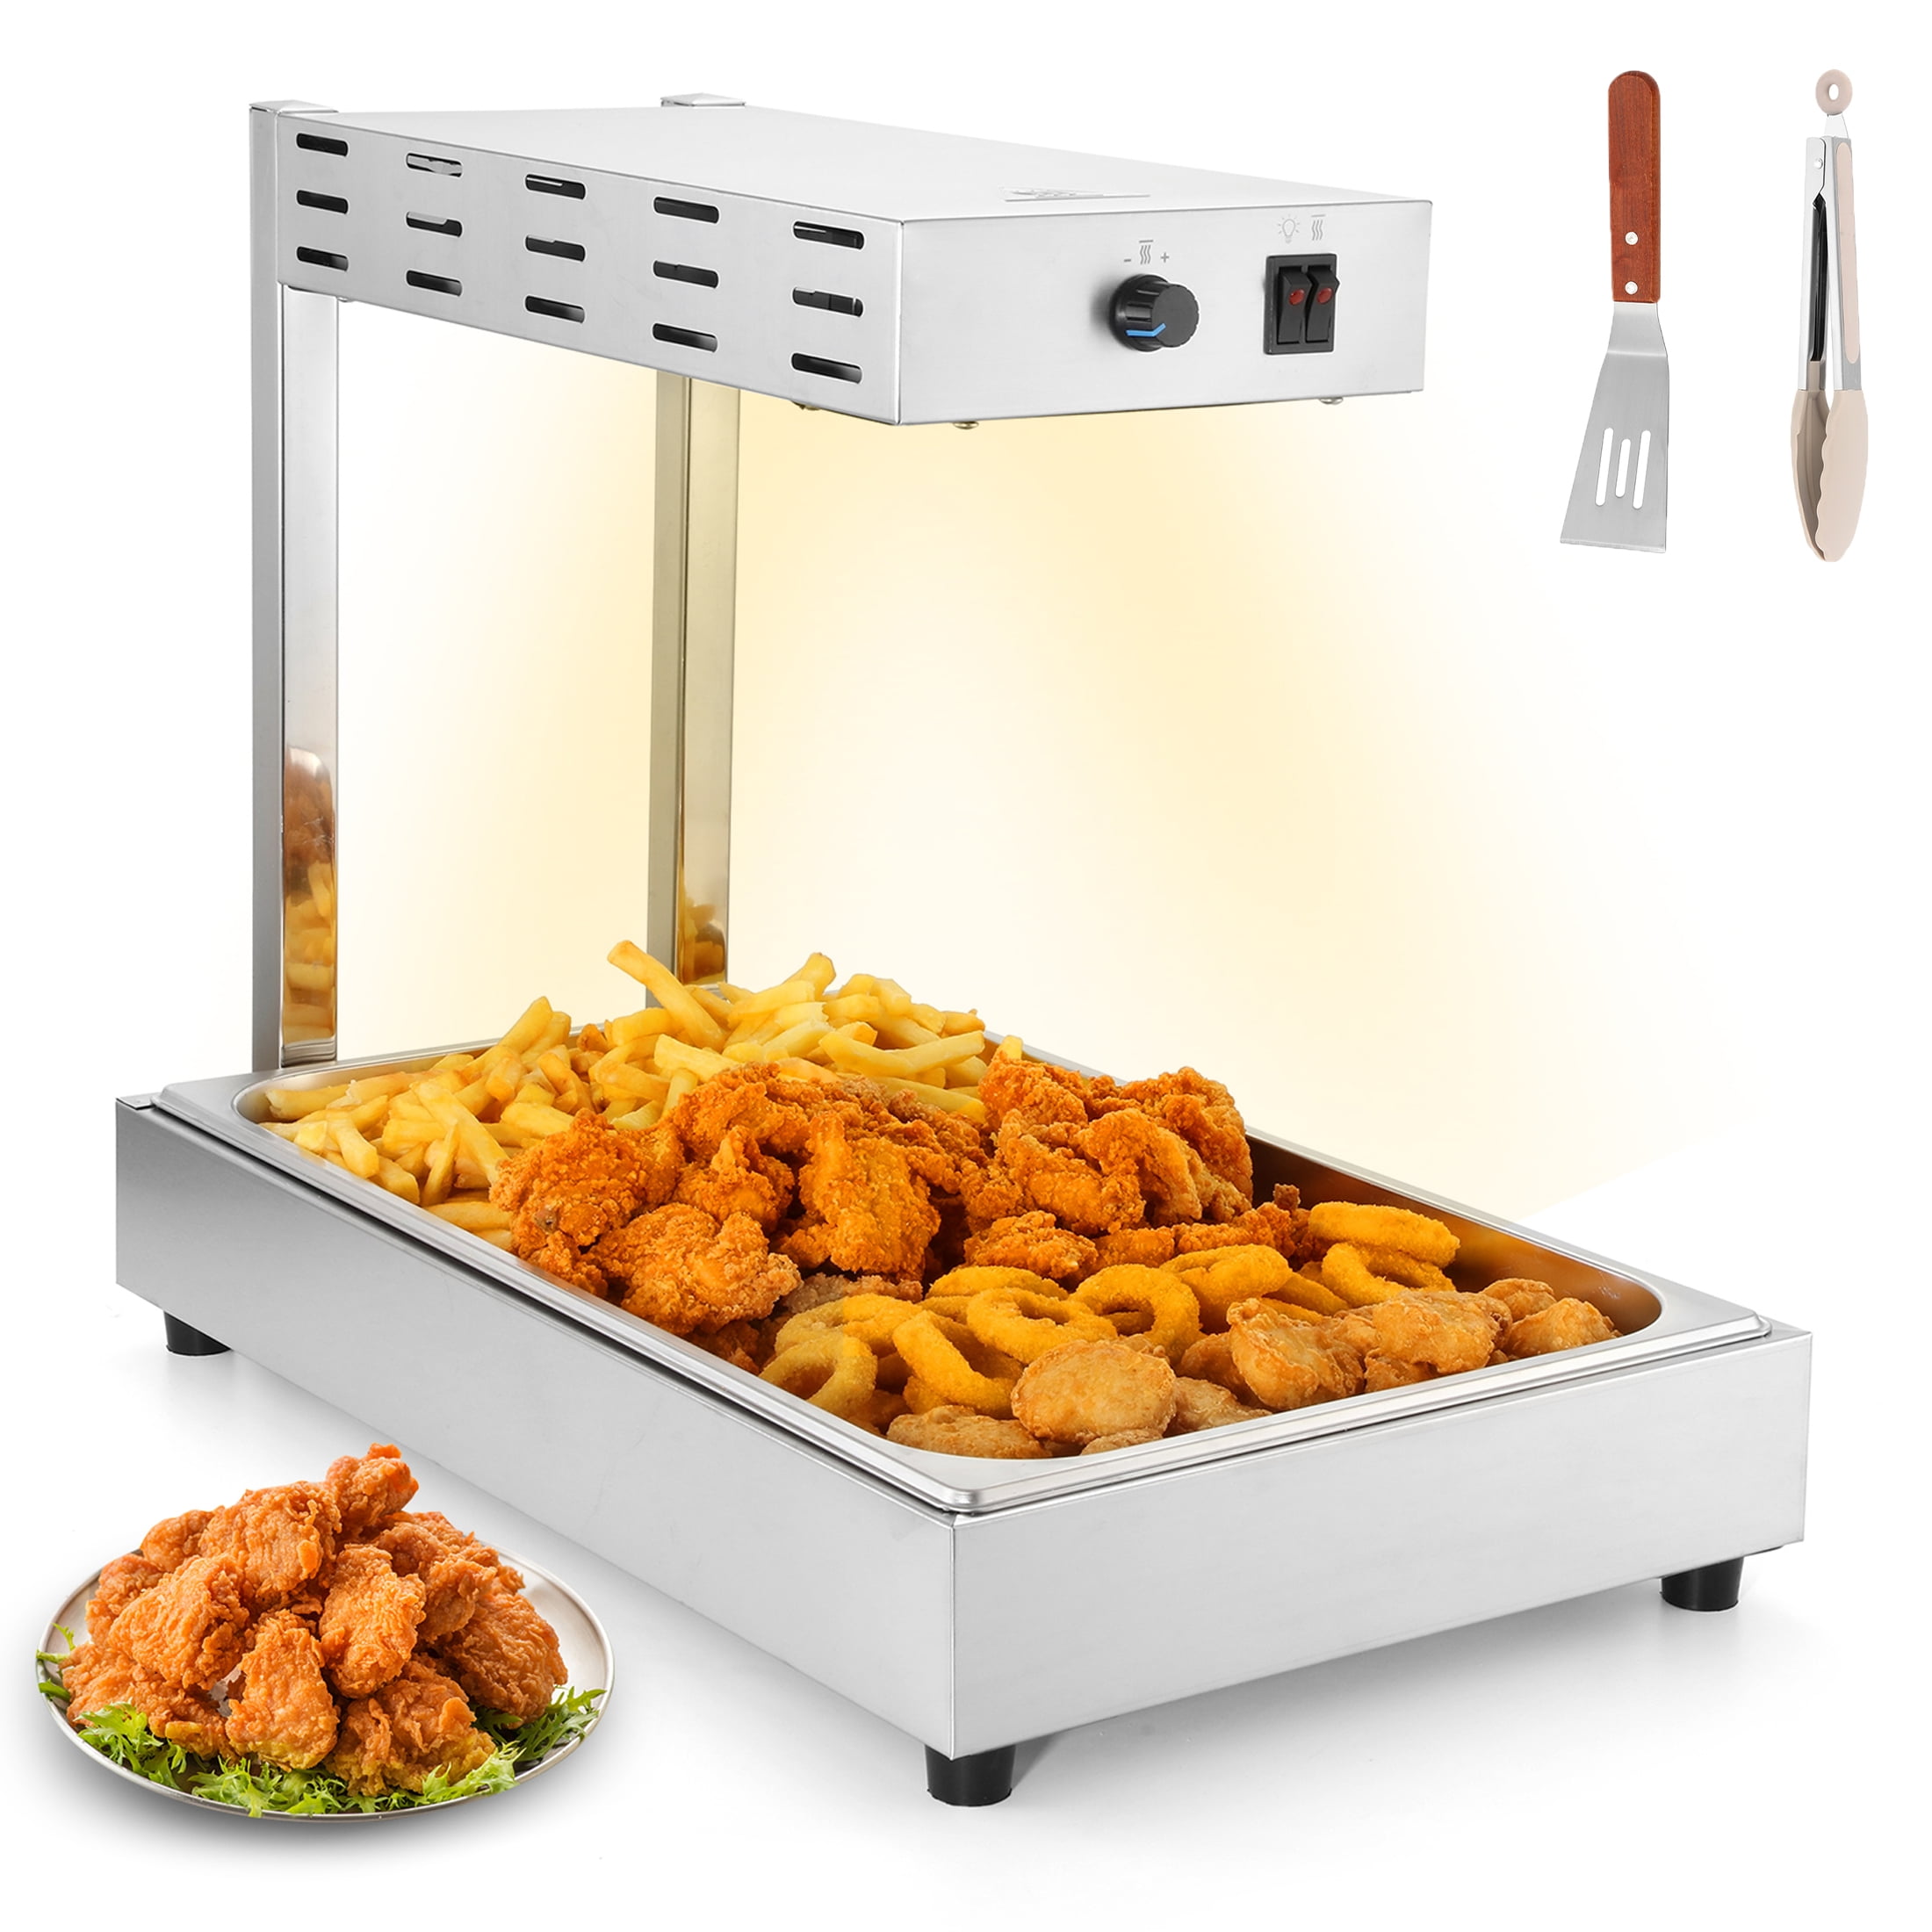 BEAMNOVA French Fry Warmer, Stainless Steel Commercial Food Heat Lamp ...